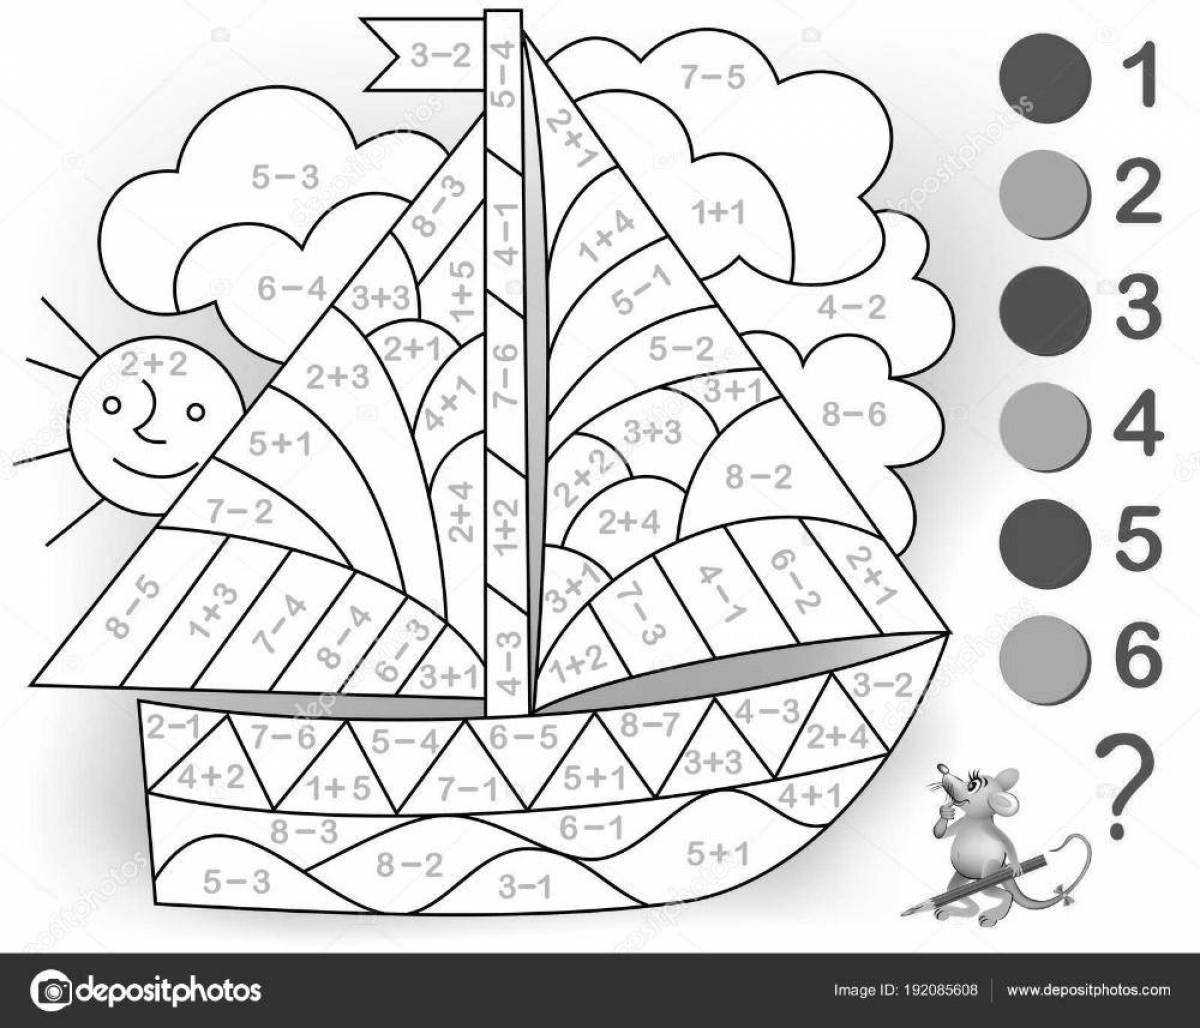 A fun math coloring book for 6-7 year olds